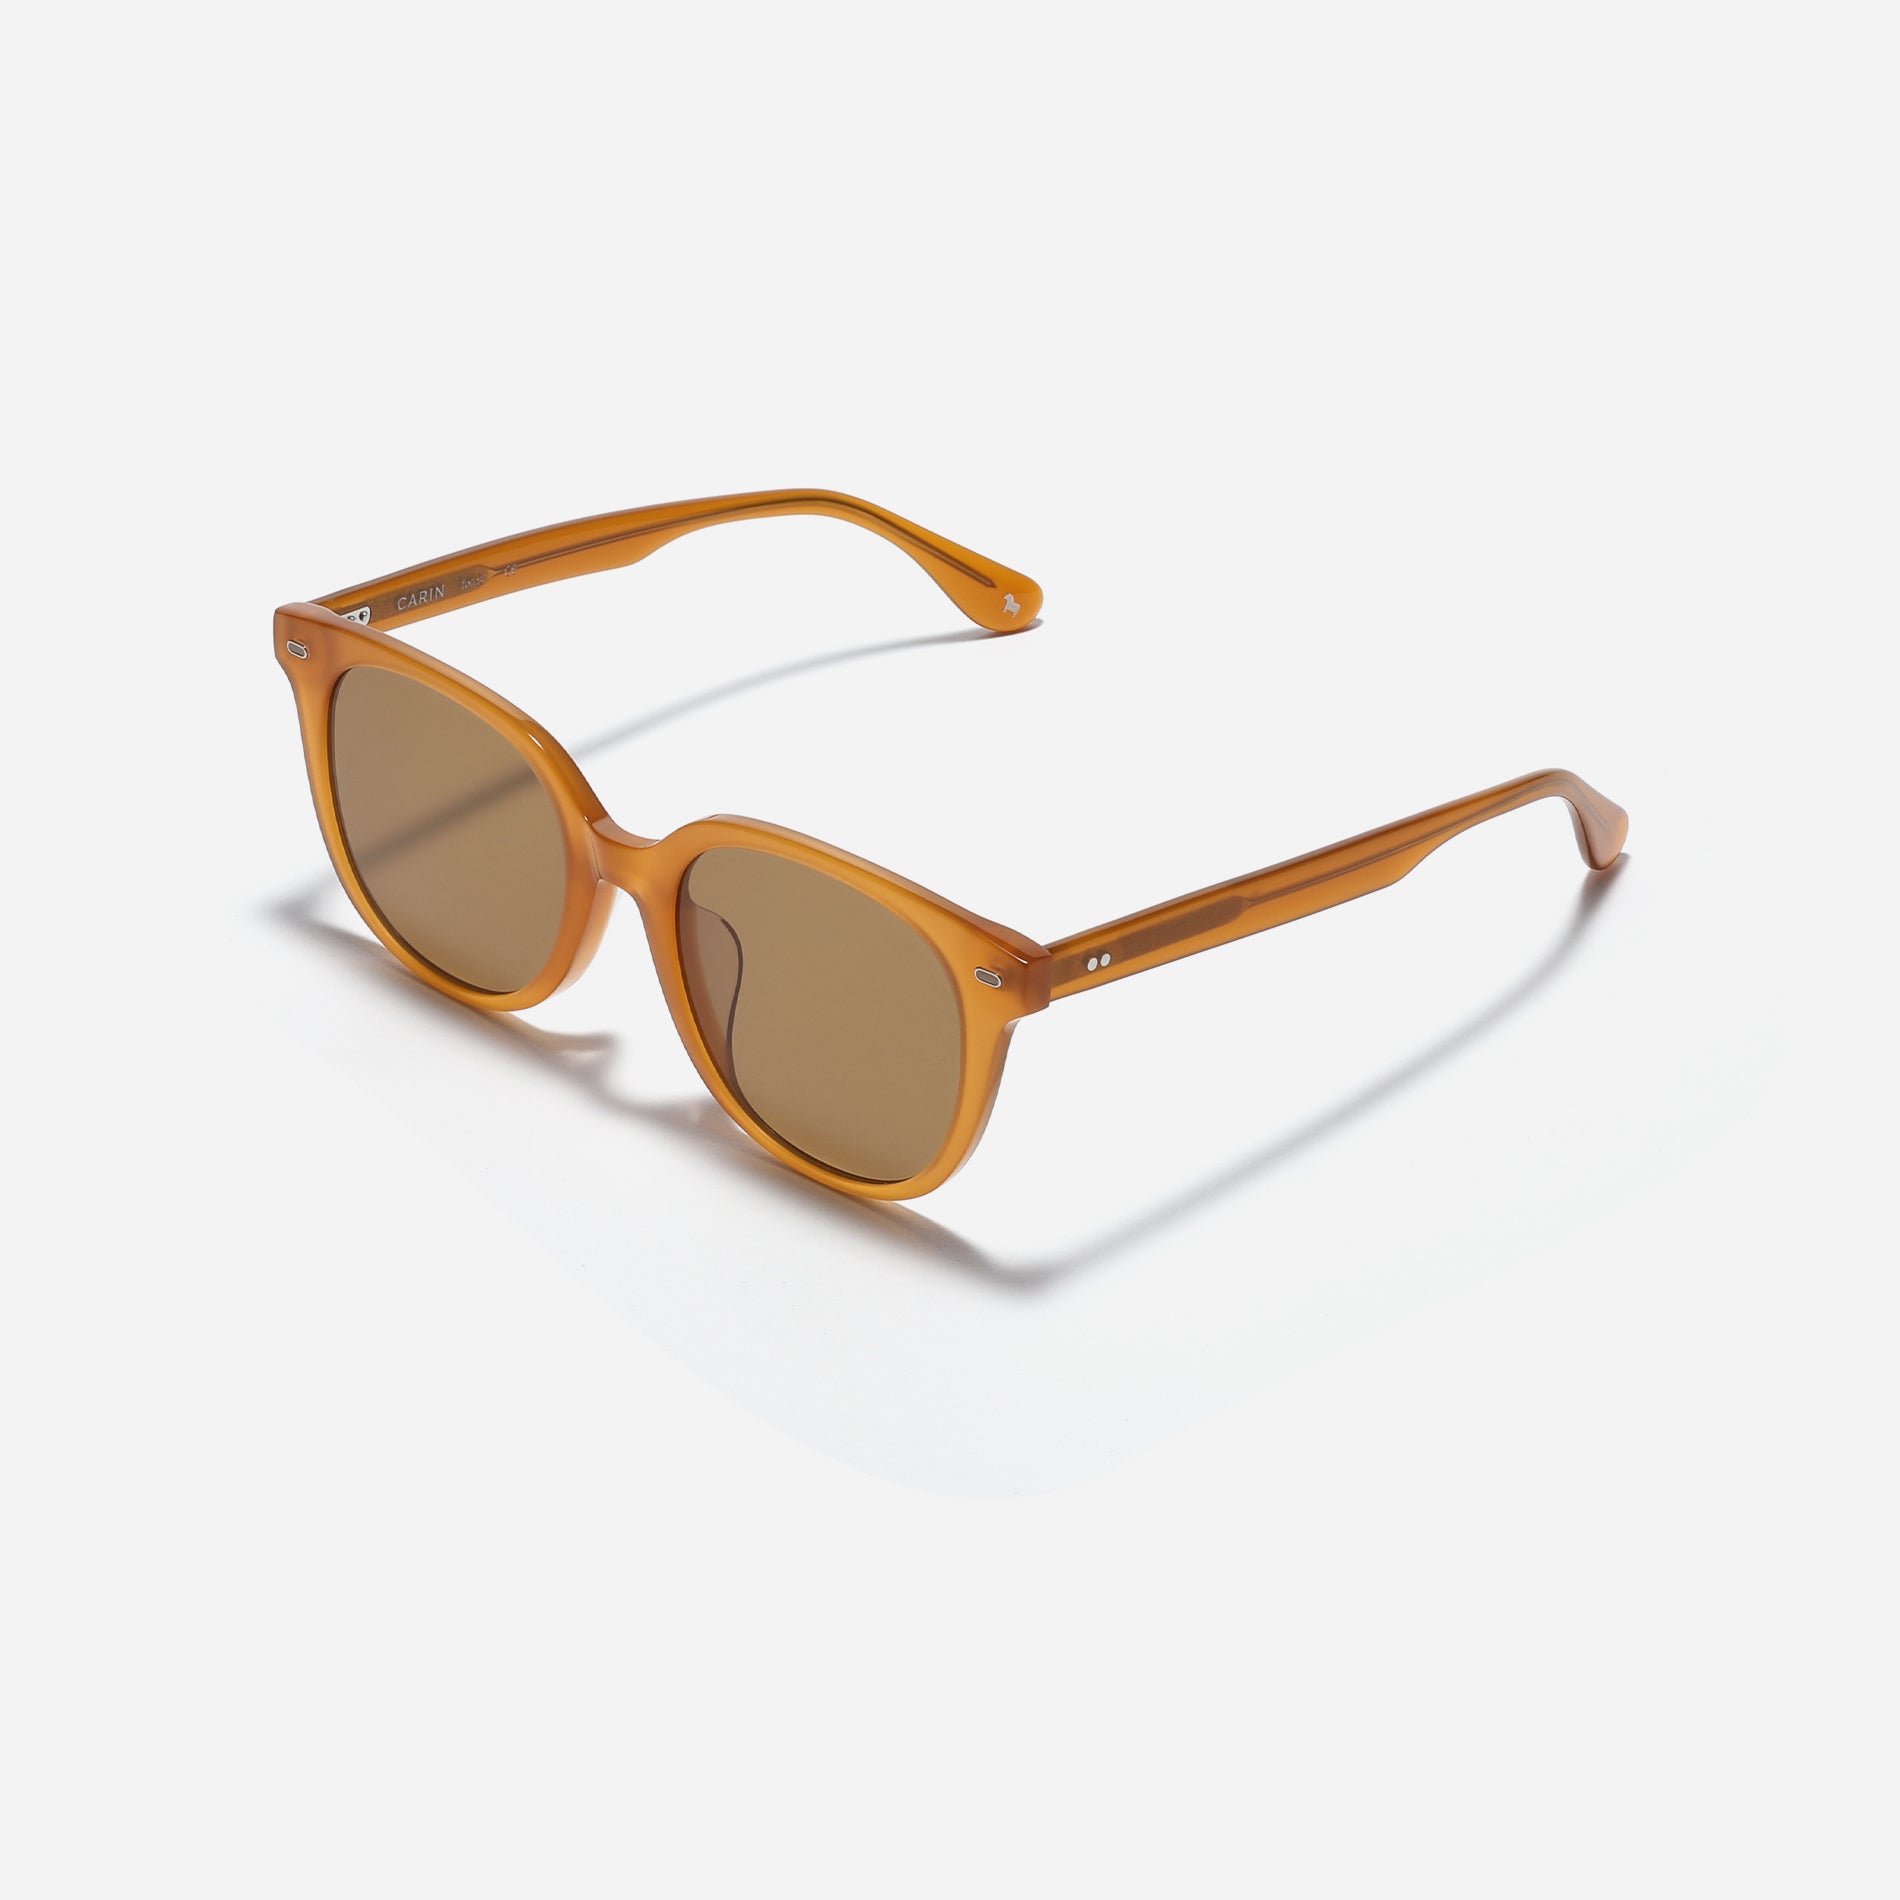 Square-shaped sunglasses from the Forest Line. With their soft form and stylish square frame, Bonnie offer a versatile and fashionable option for everyday wear, especially appealing to those new to sunglasses.